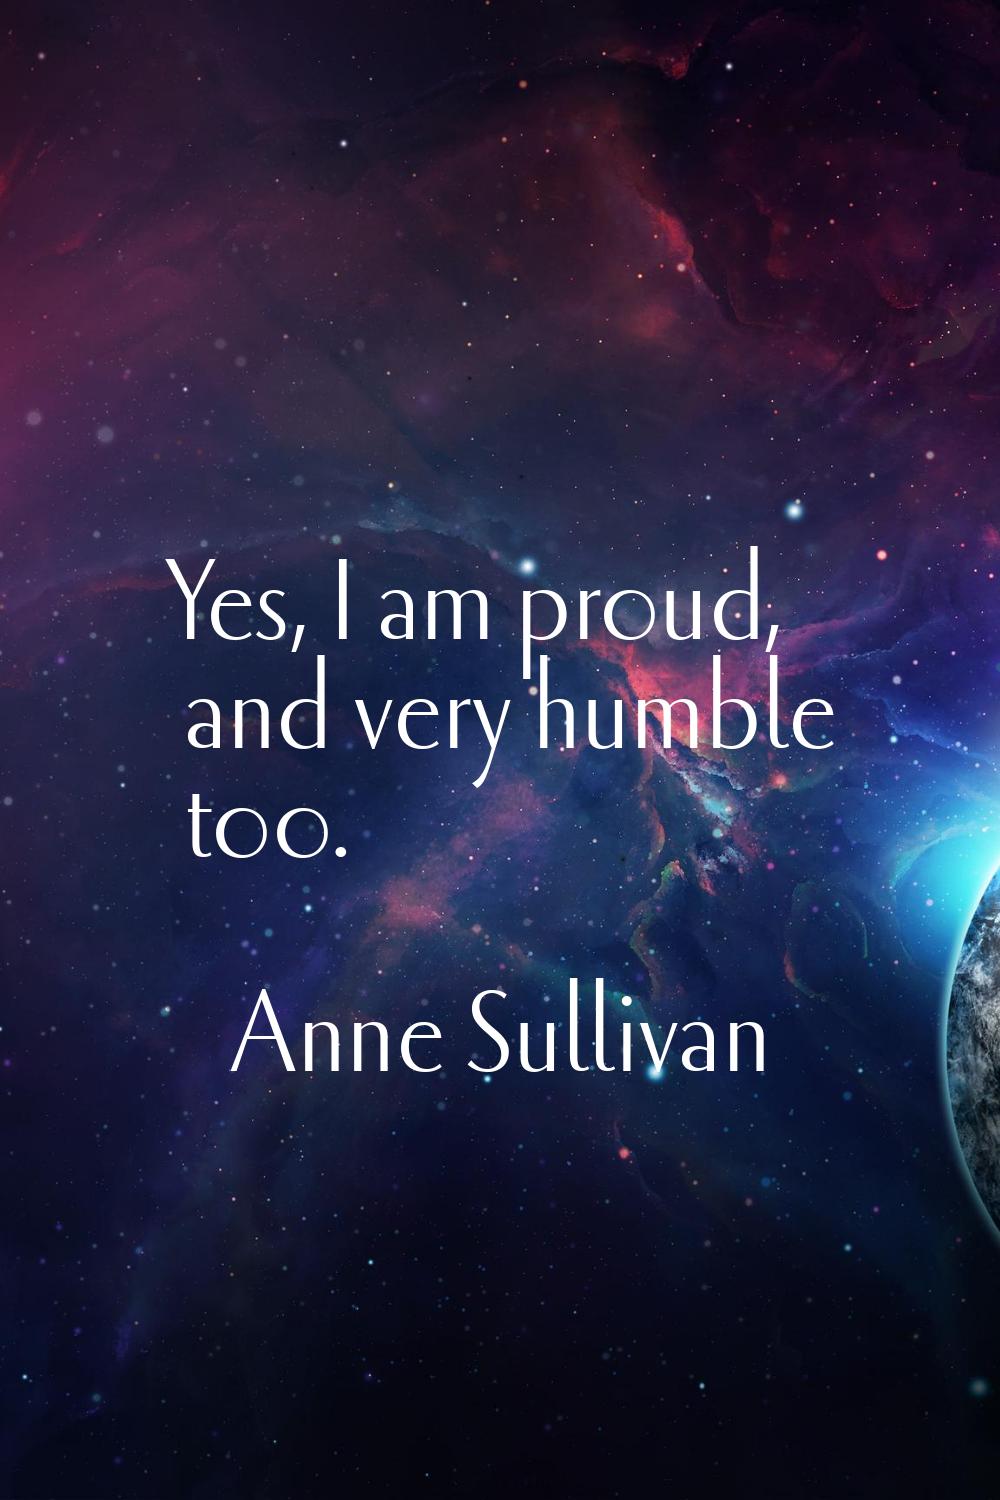 Yes, I am proud, and very humble too.